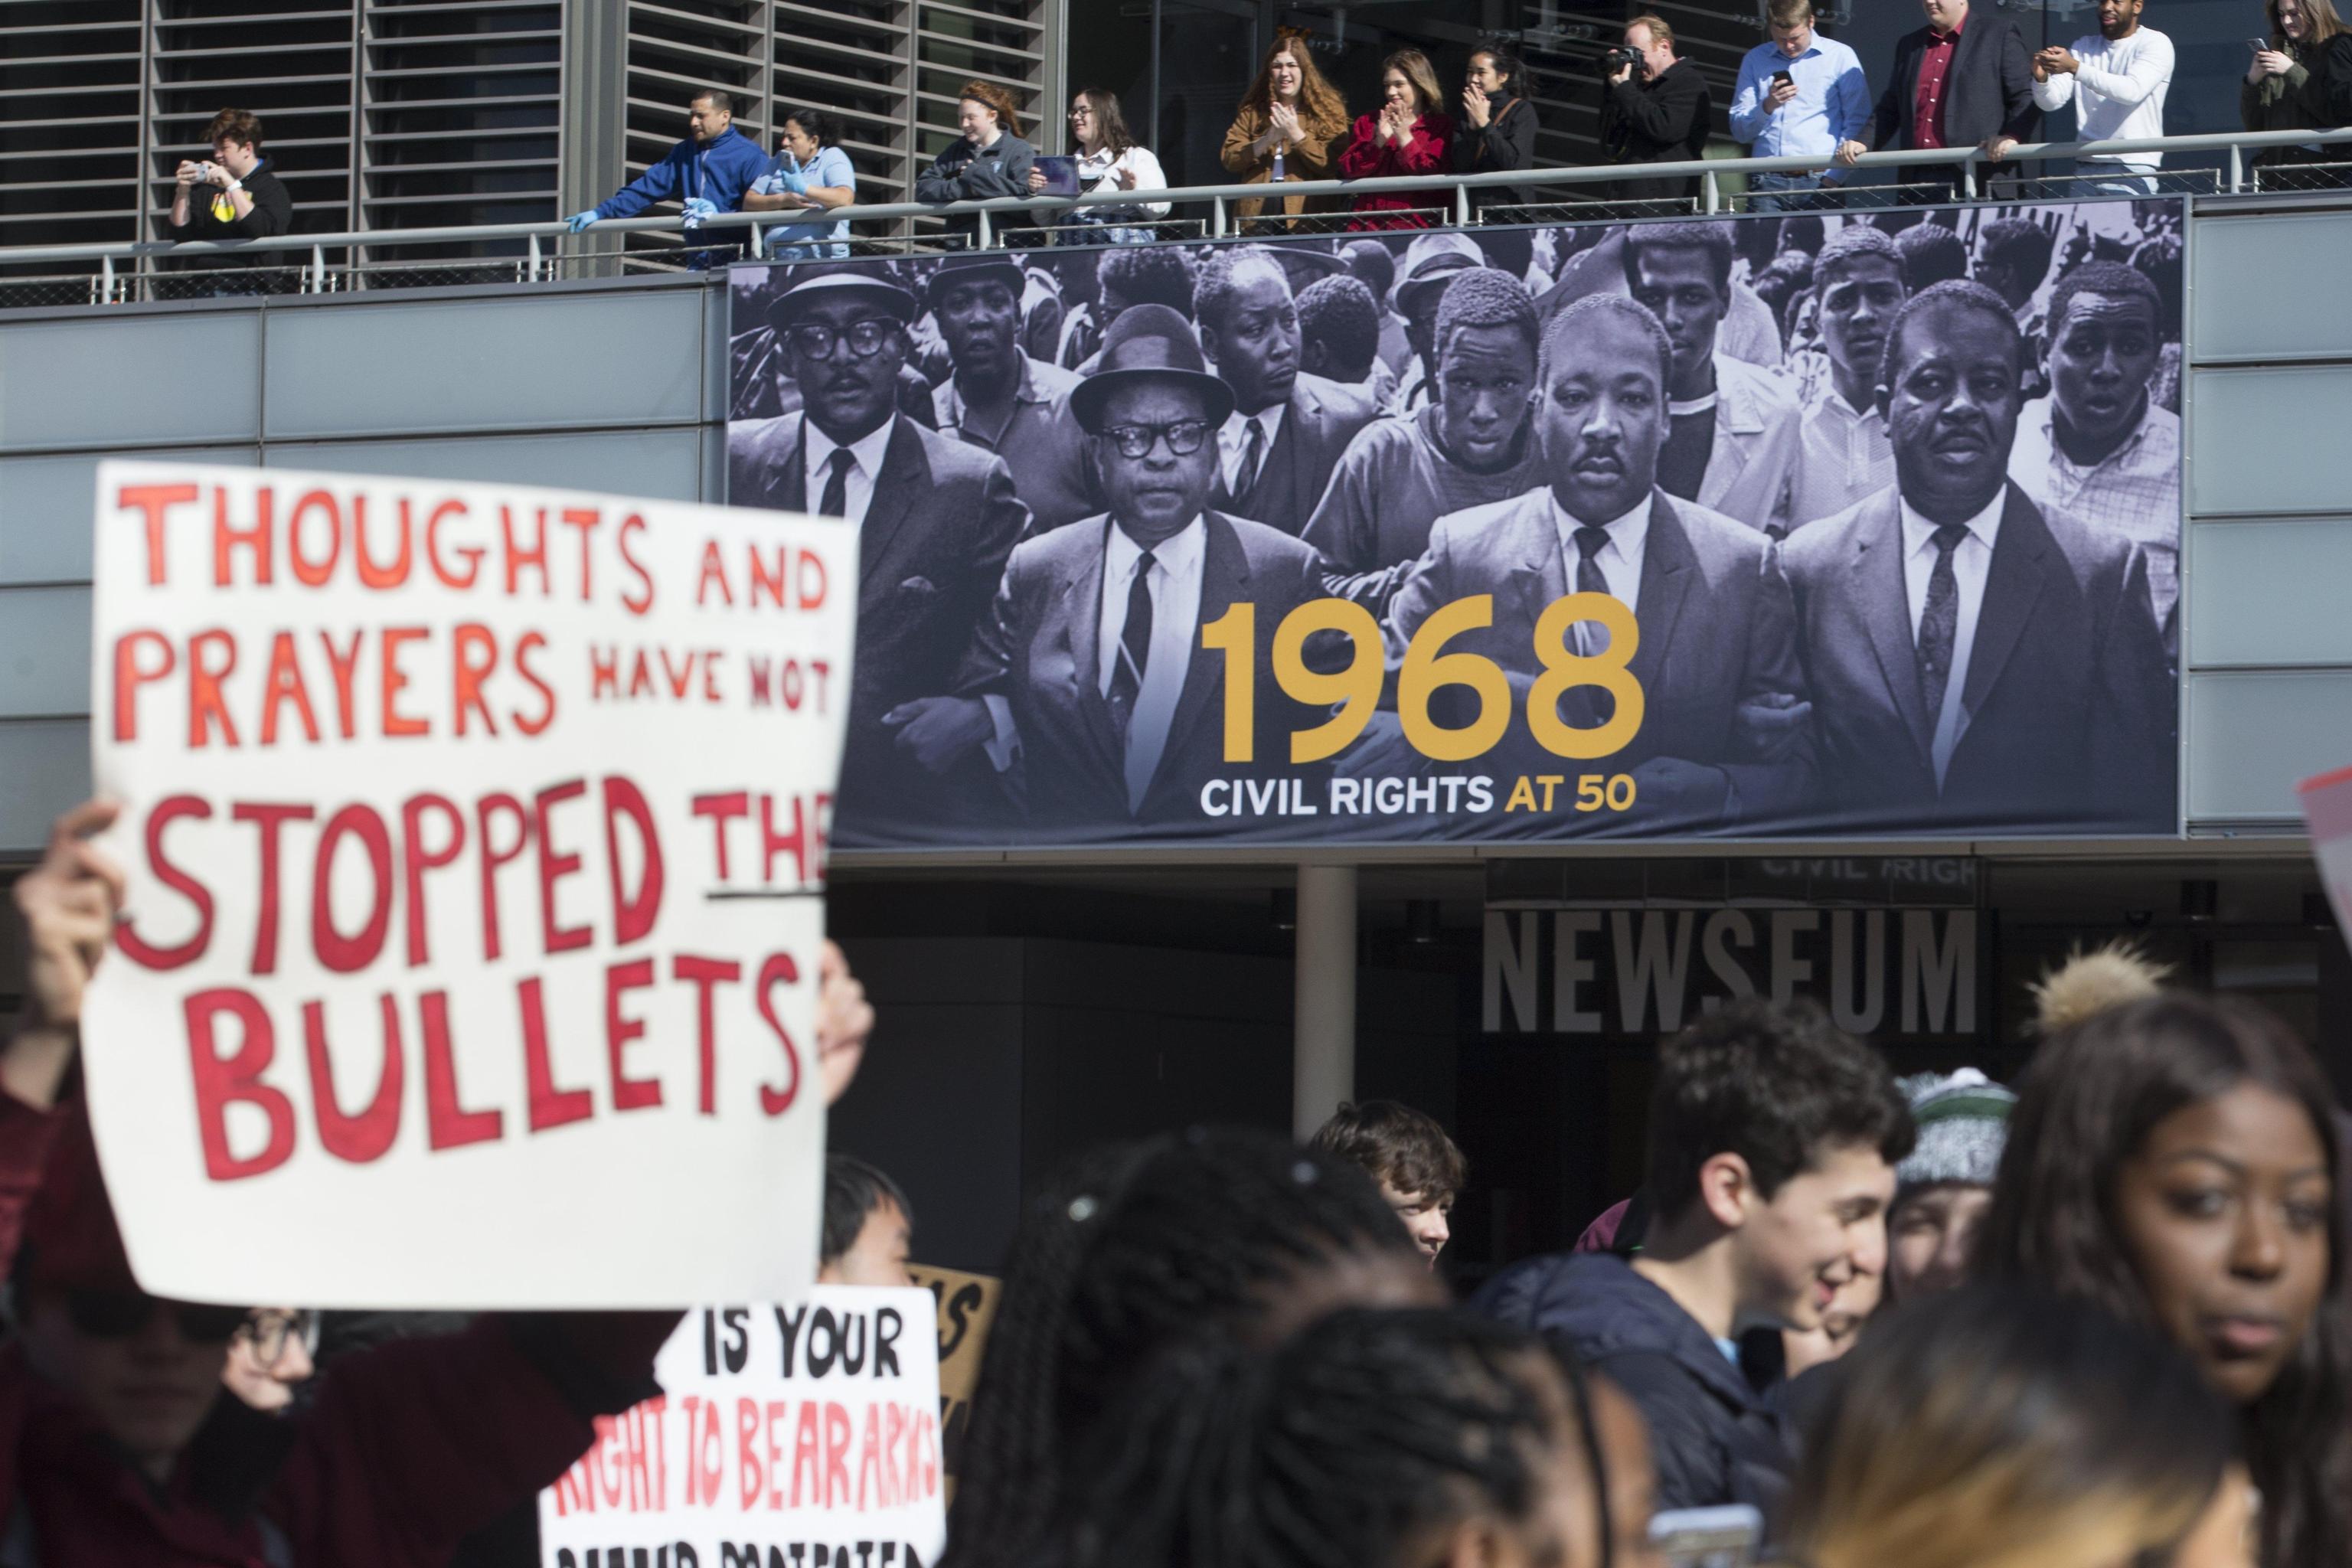 epa06604026 Young people marching in the national school walkout over gun violence pass the image of the late Dr. Martin Luther King Jr., as people cheer them on at the Newseum while the group walks from the White House to Capitol Hill, in Washington, DC, USA, 14 March 2018. Students across the United States were expected to walk out of their classes for seventeen minutes to honor the seventeen victims of the 14 February shooting at Marjory Stoneman Douglas High School in Parkland, Florida.  EPA/MICHAEL REYNOLDS